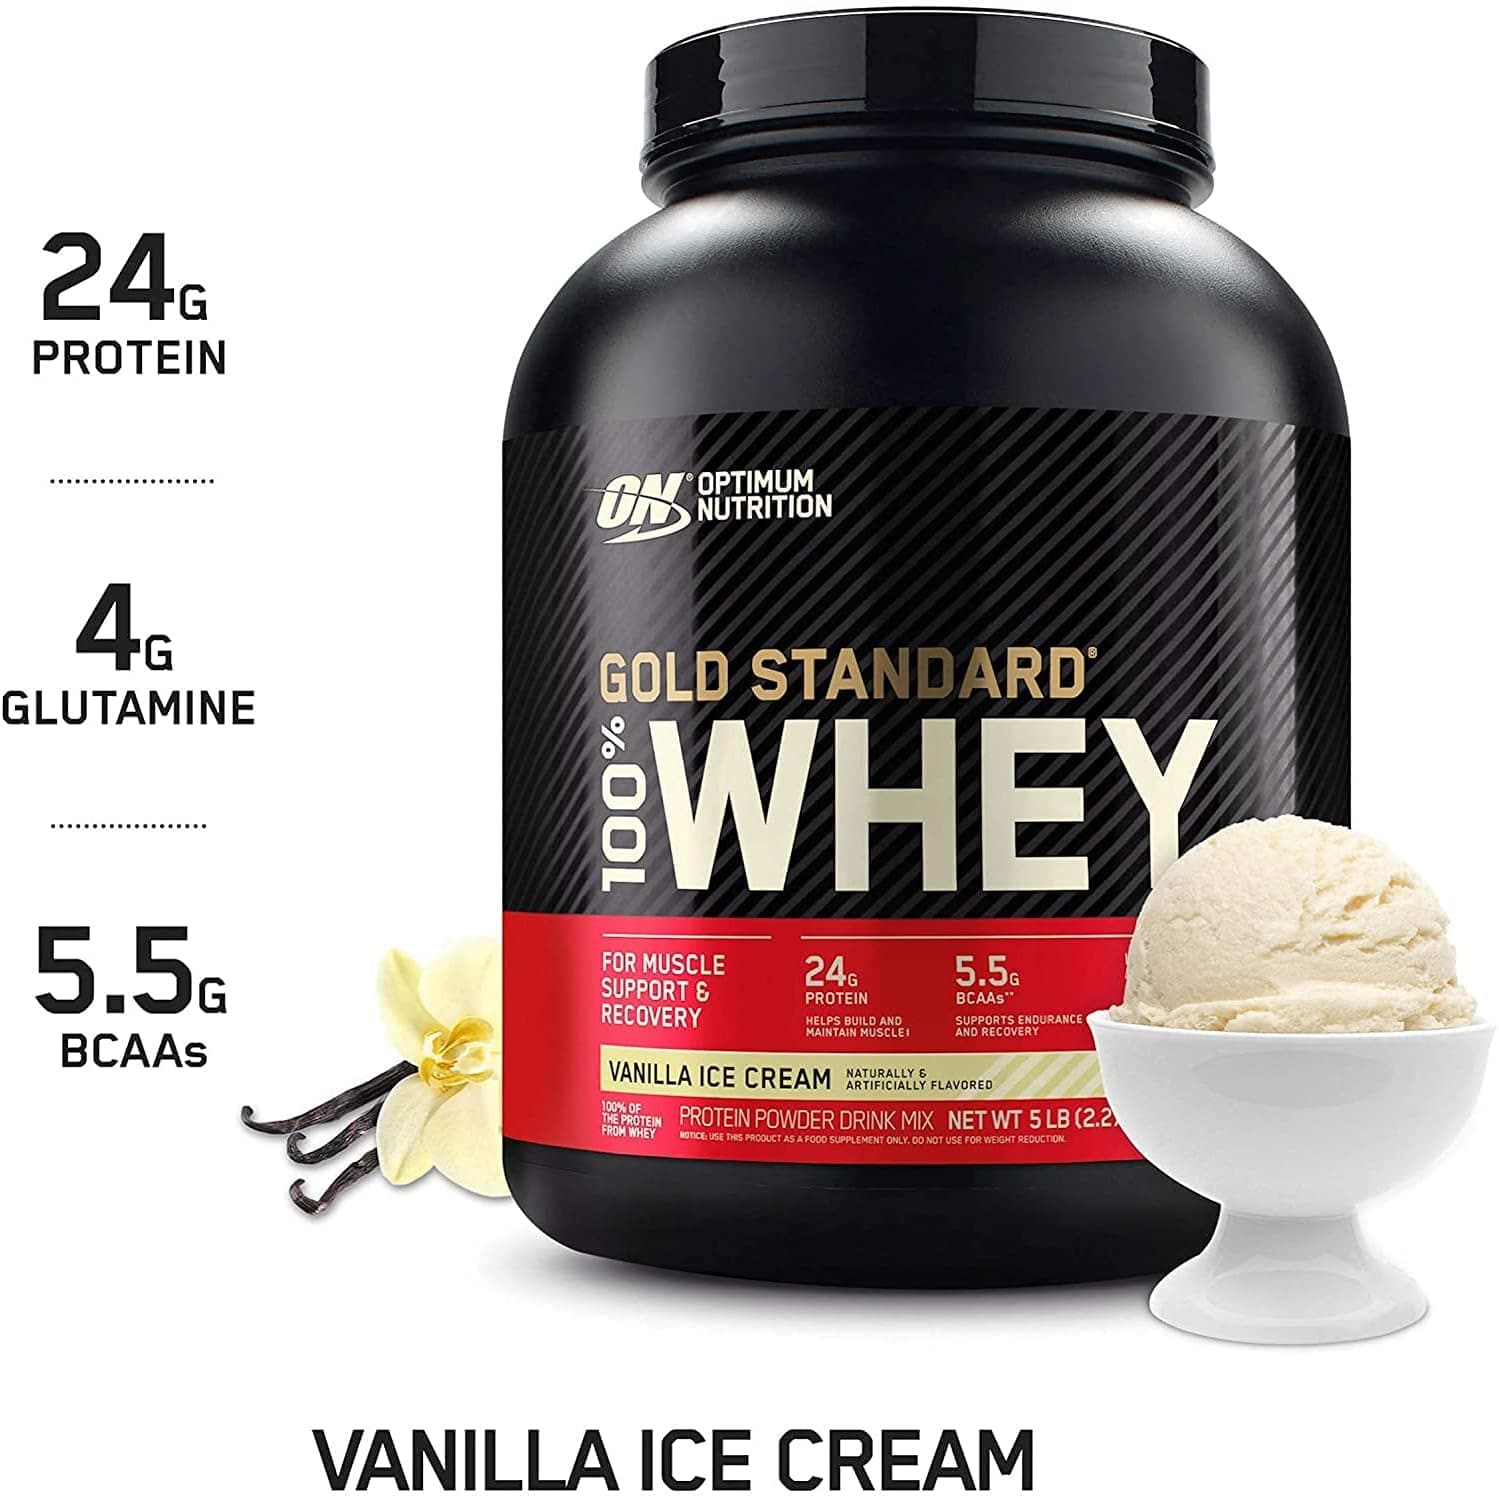 Optimum Nutrition Gold Standard 100% Whey Protein for Post-Workout Muscle Support & Recovery, 5 lbs - 2.27 Kg